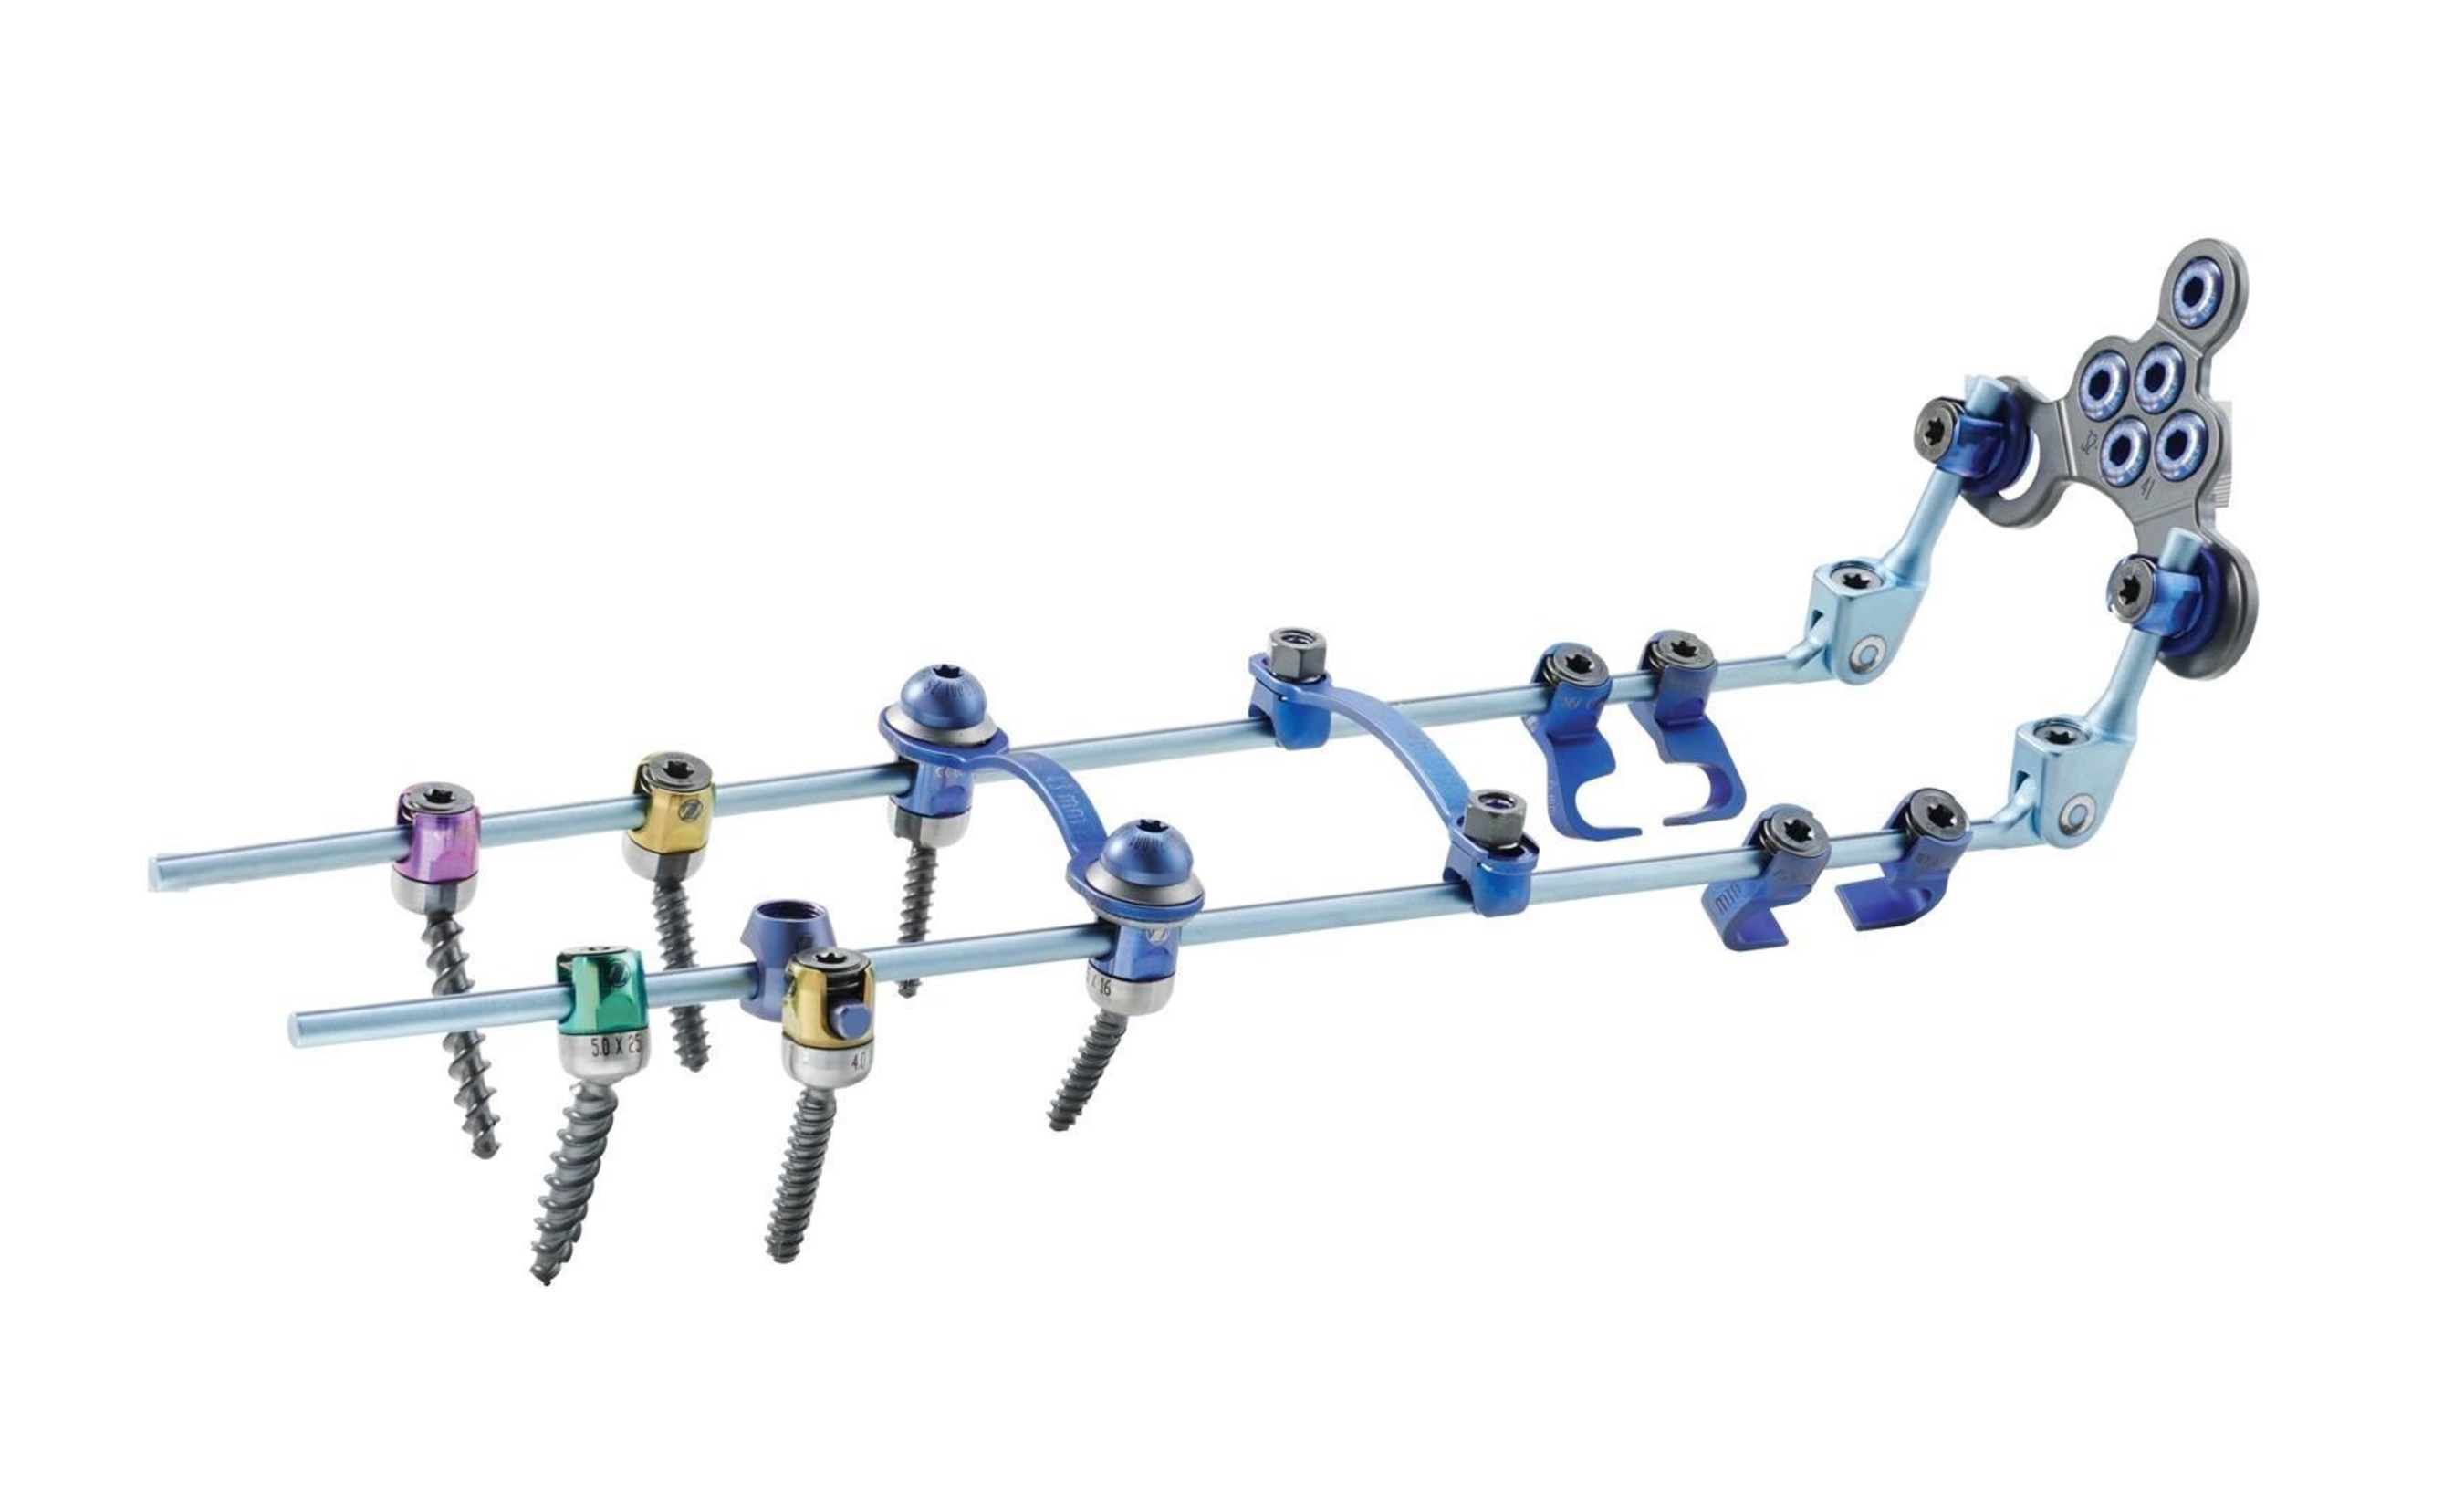 Virage OCT Spinal Fixation System